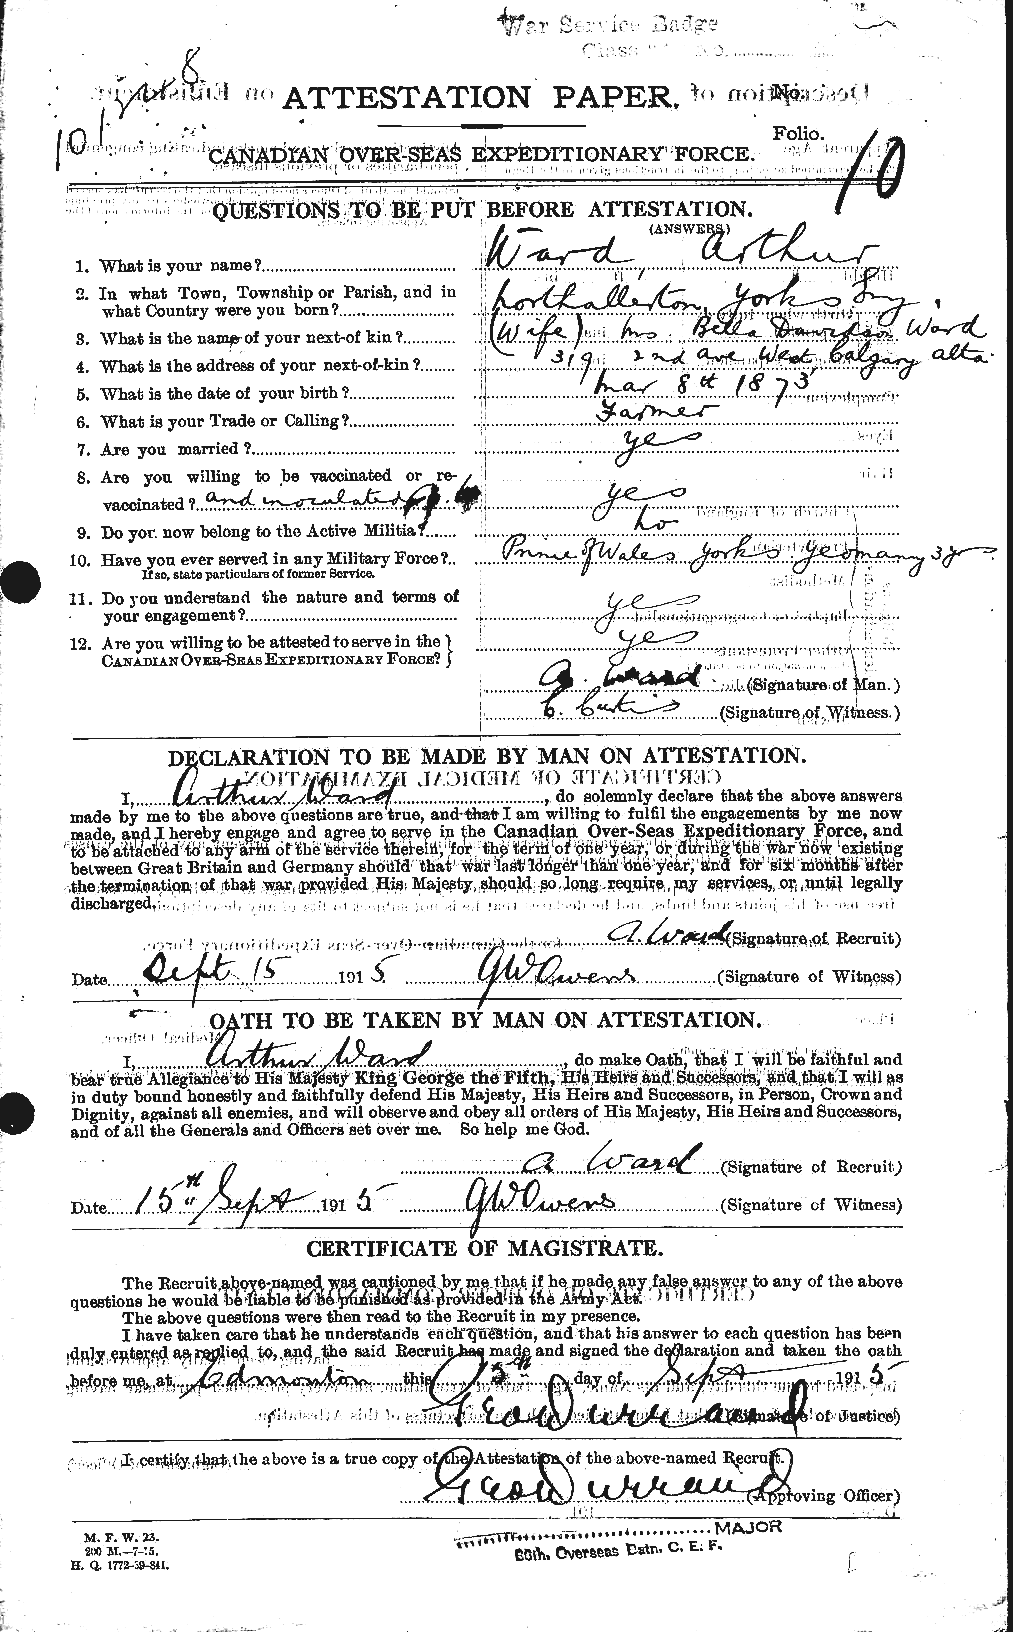 Personnel Records of the First World War - CEF 655149a